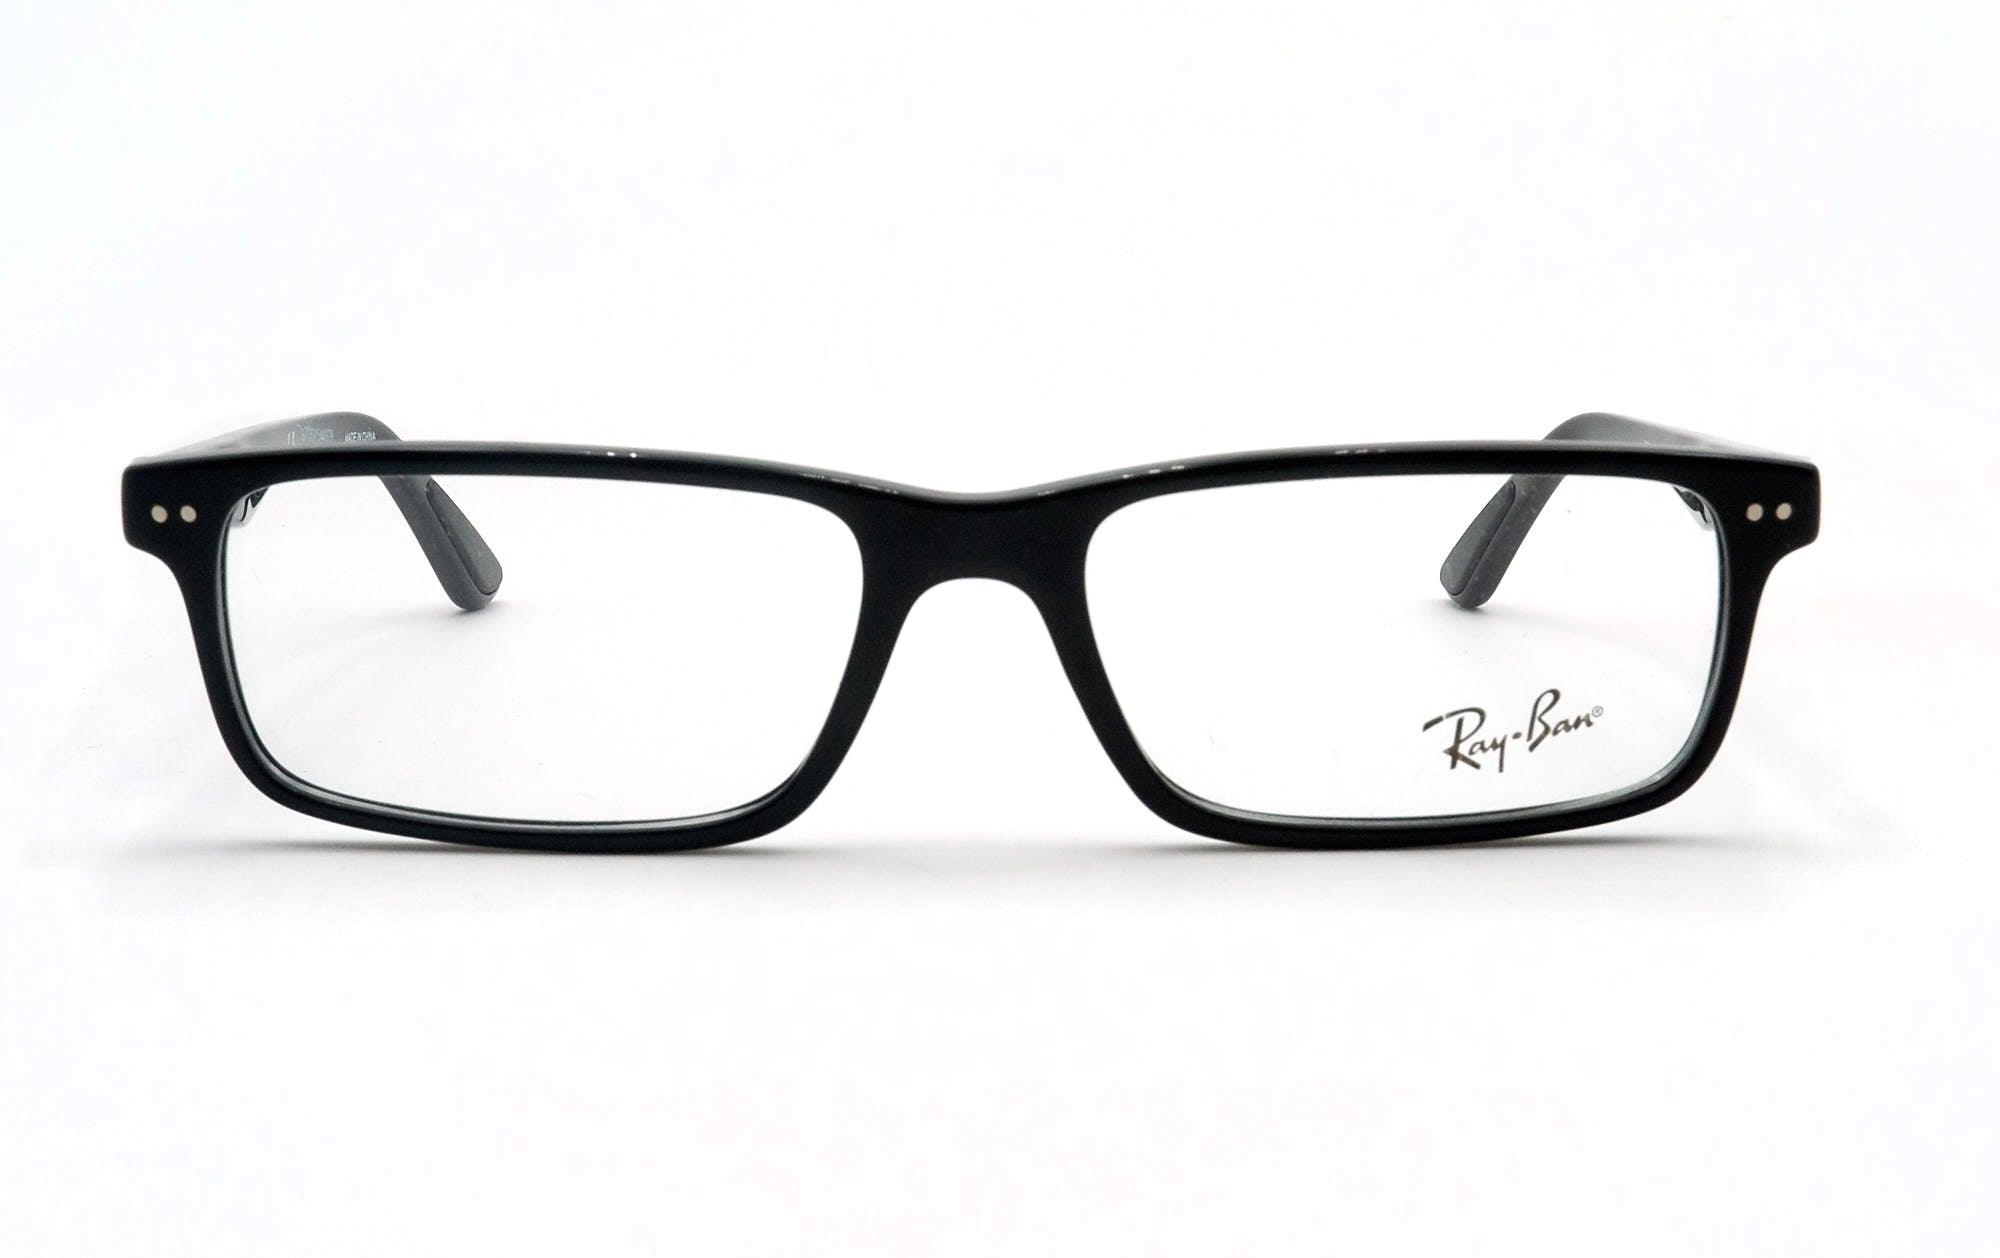 RAY-BAN 5277 2000 - Opticas Lookout